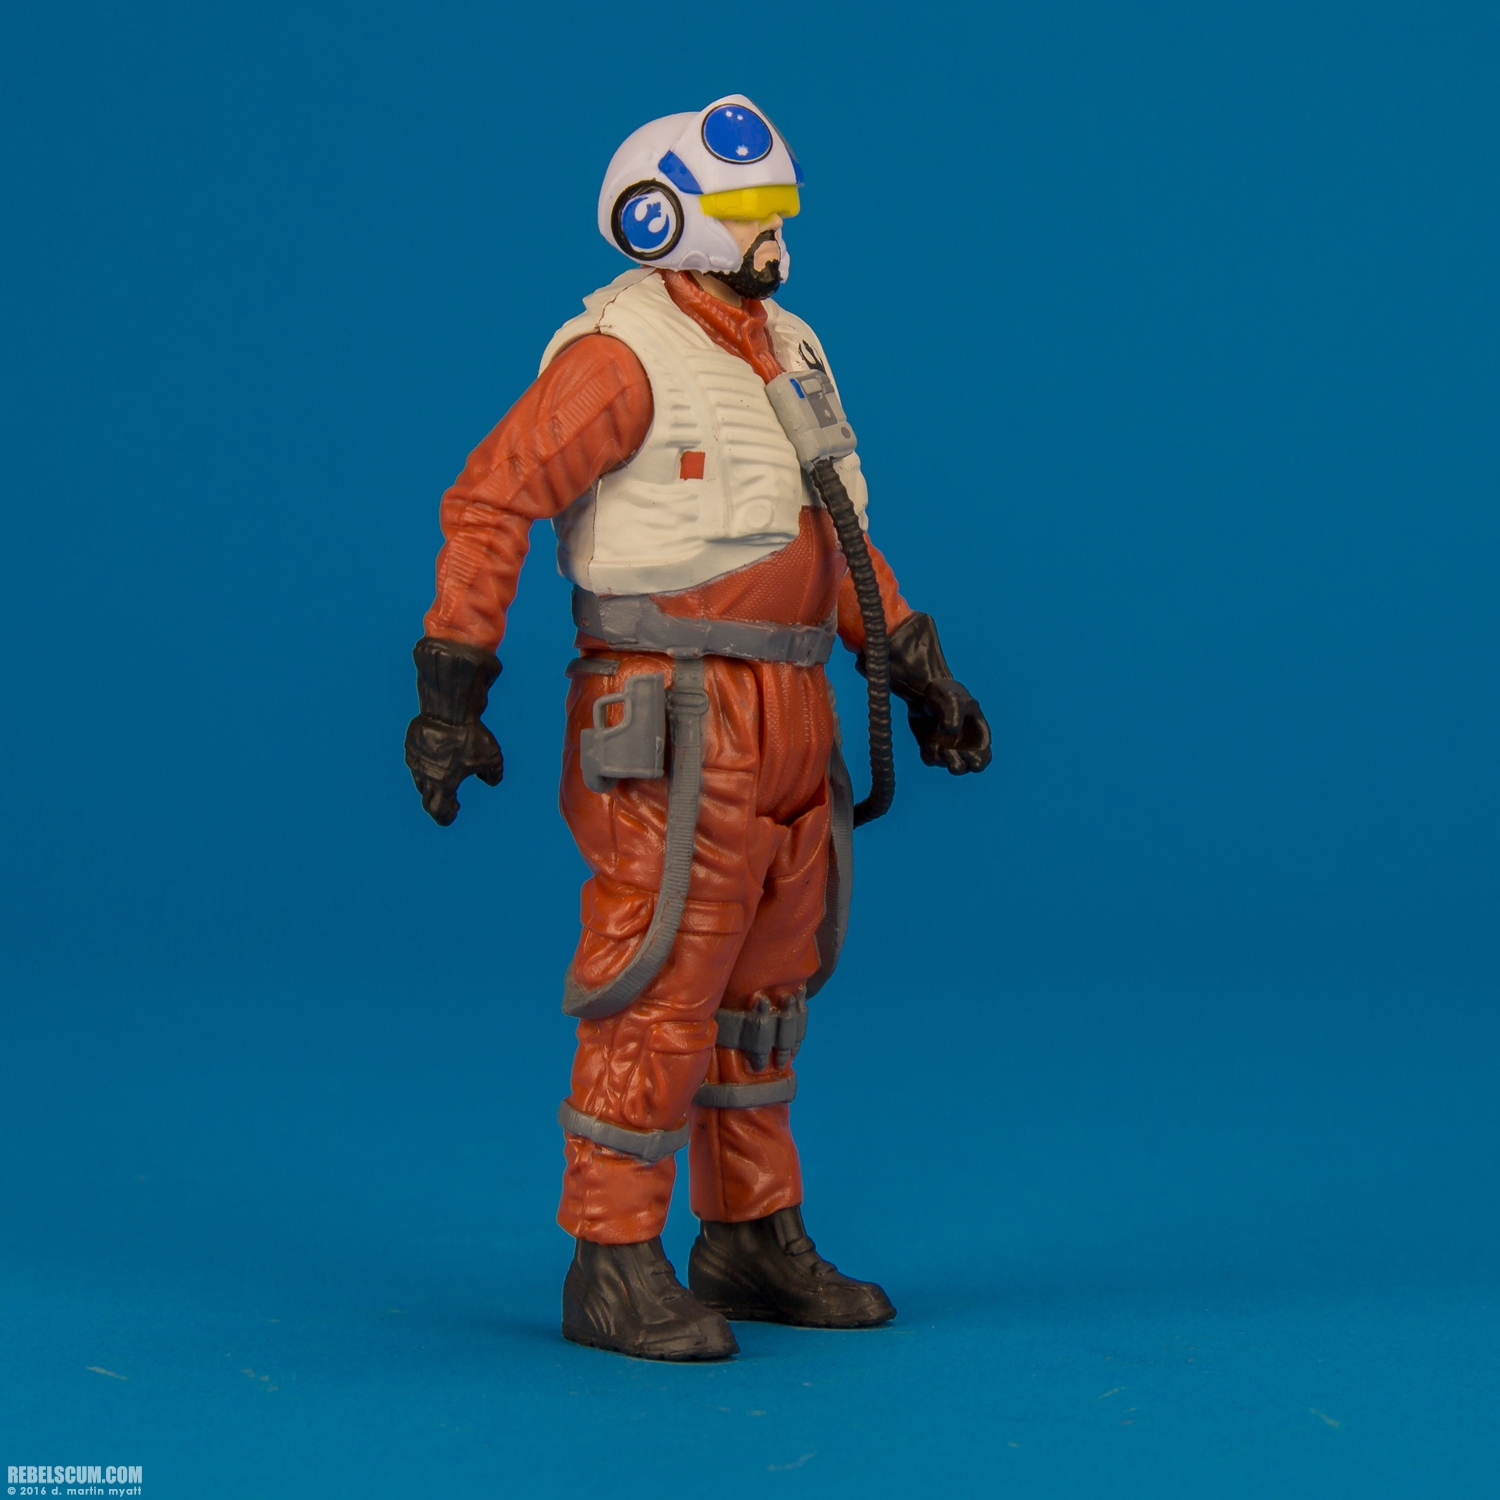 First-Order-Snowtrooper-Officer-Snap-Wexley-The-Force-Awakens-002.jpg